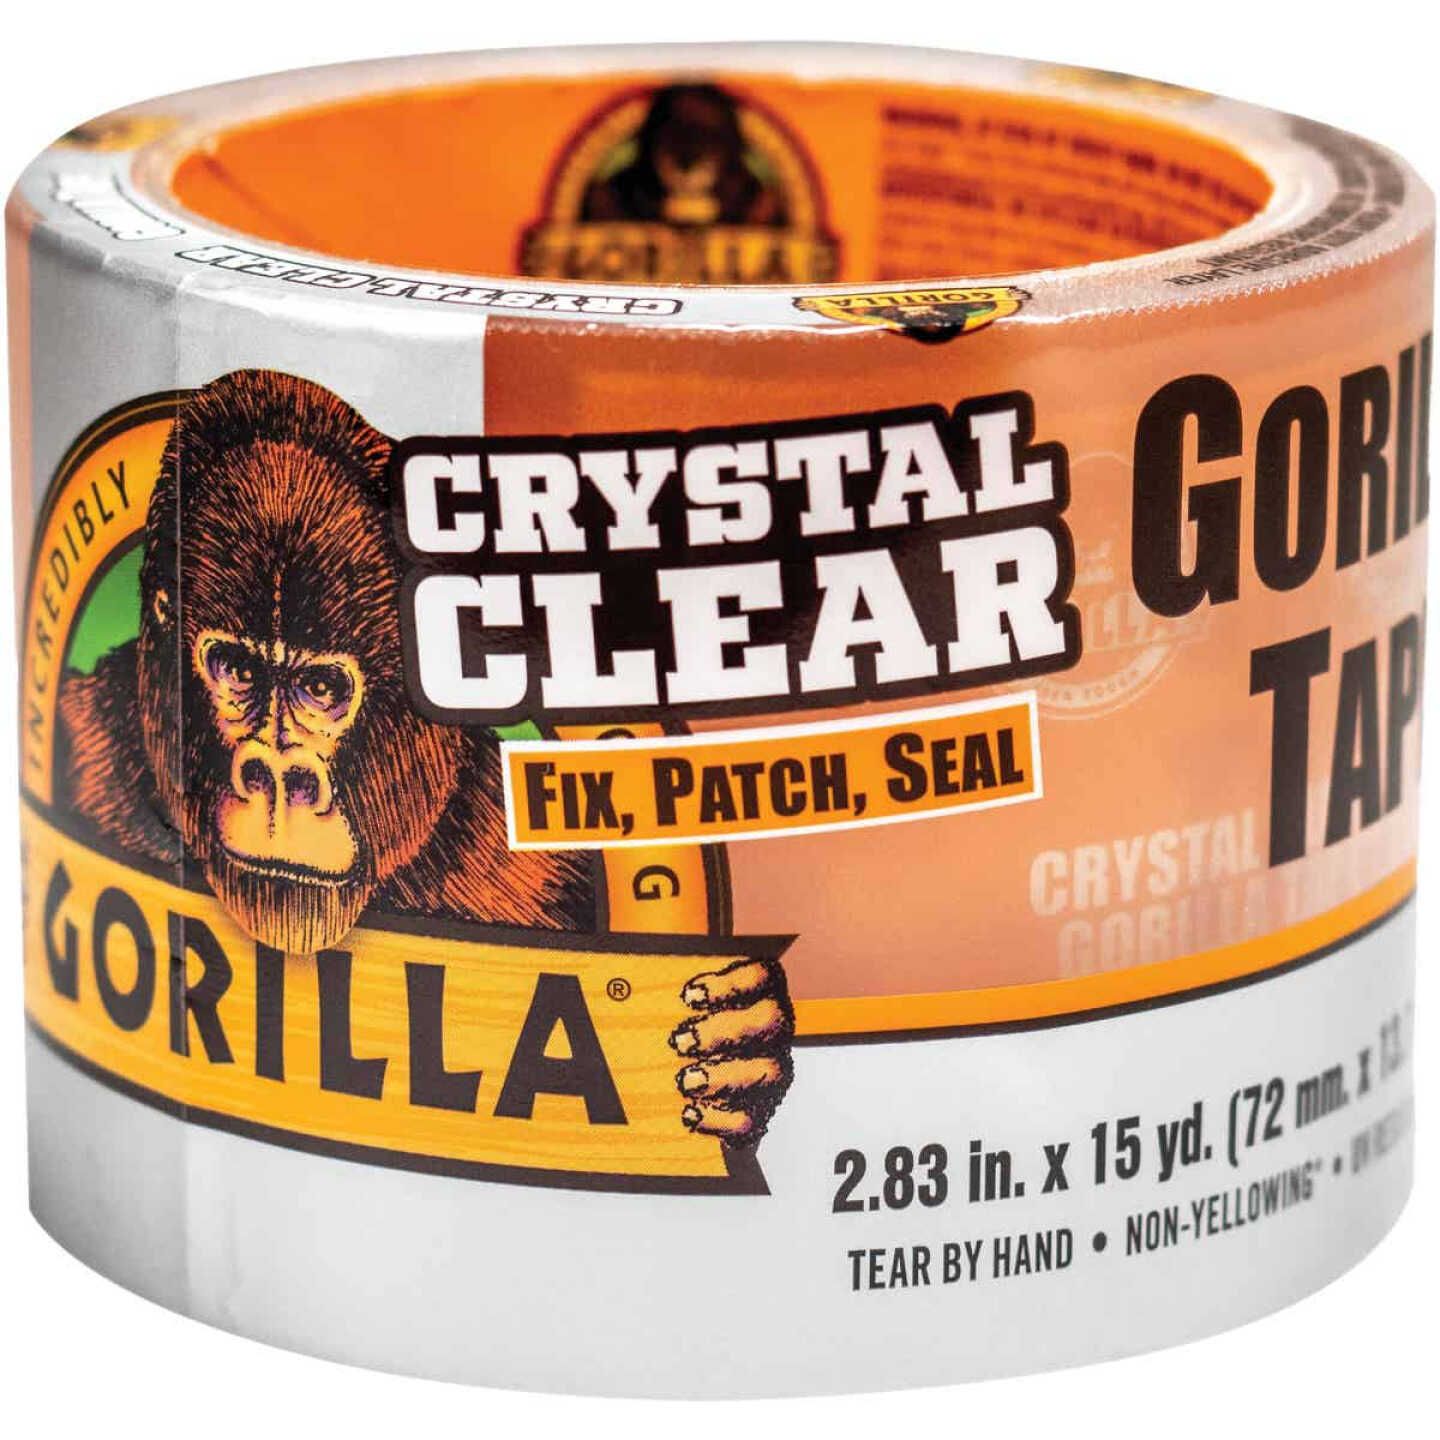 Gorilla Glue Waterproof Spray Clear at Tractor Supply Co.